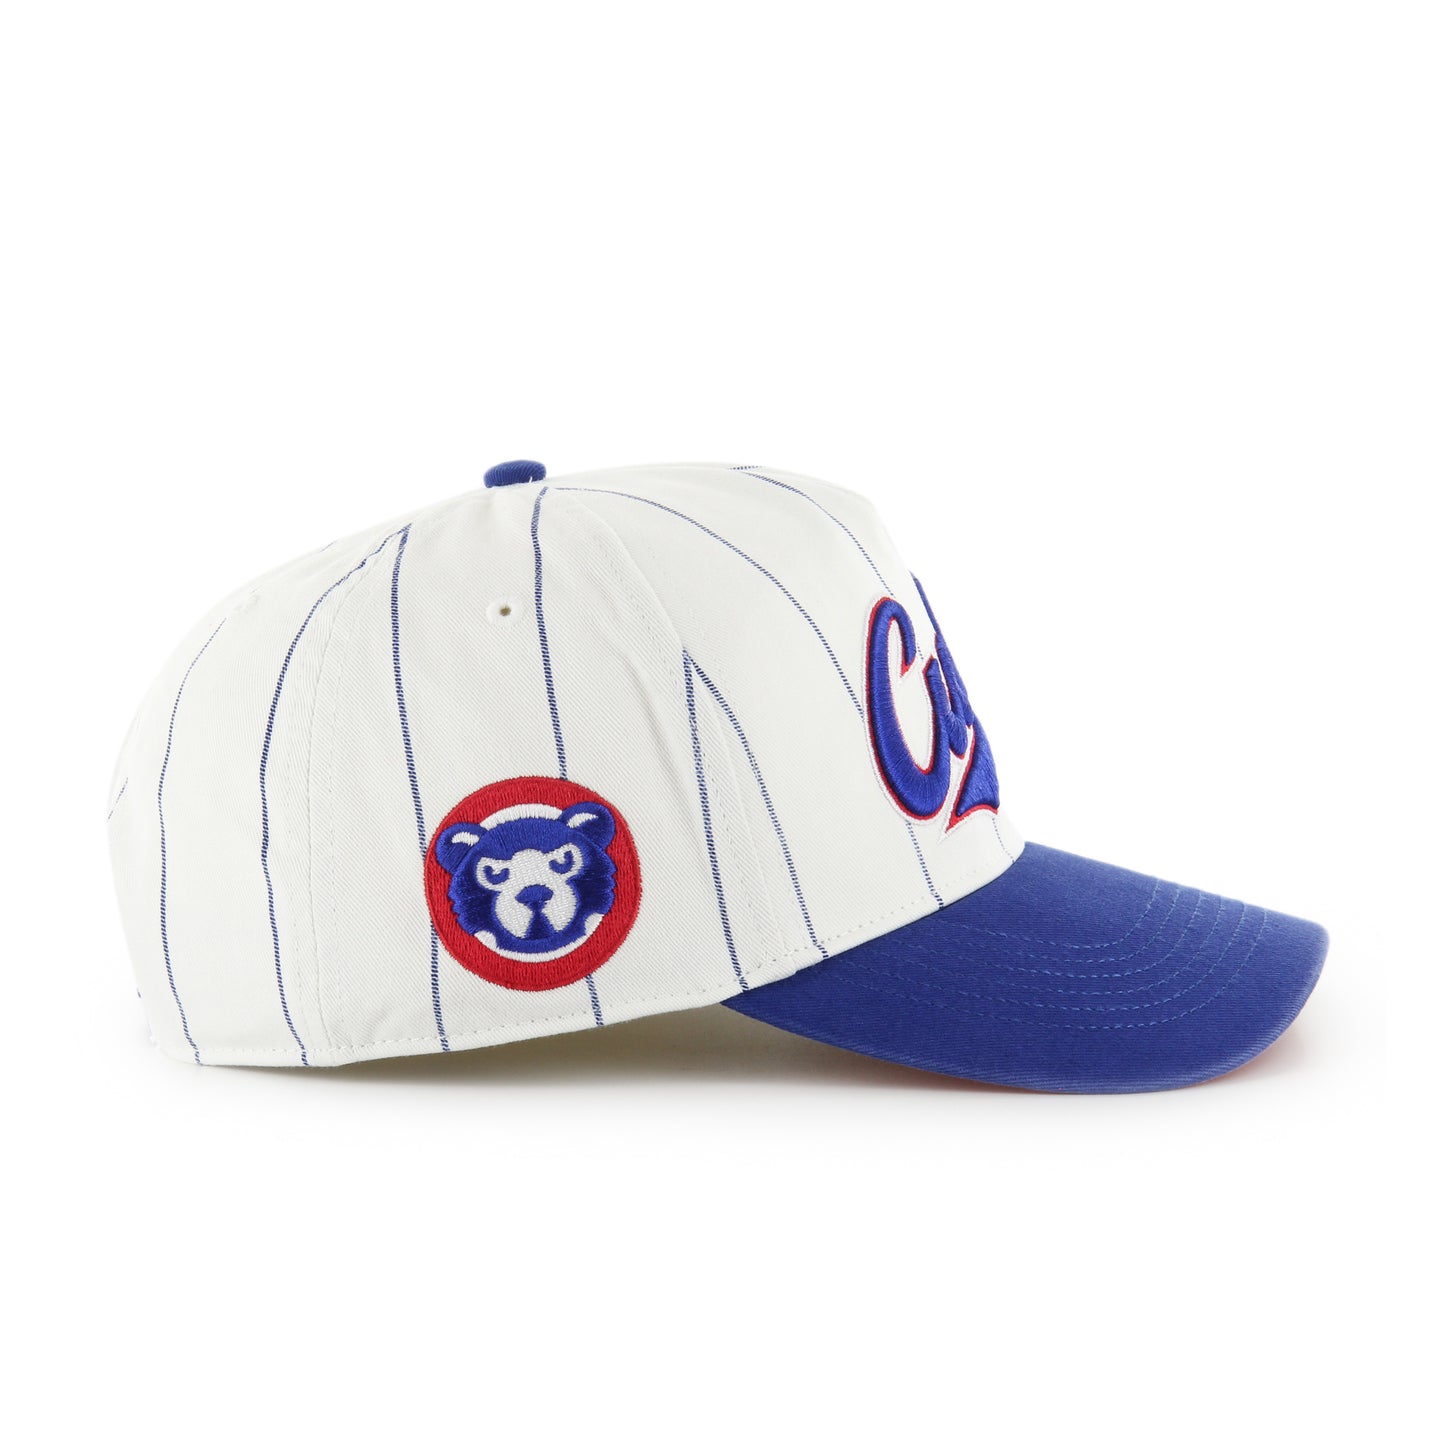 Chicago Cubs Double Header Pinstripe '47 Hitch Adjustable Hat